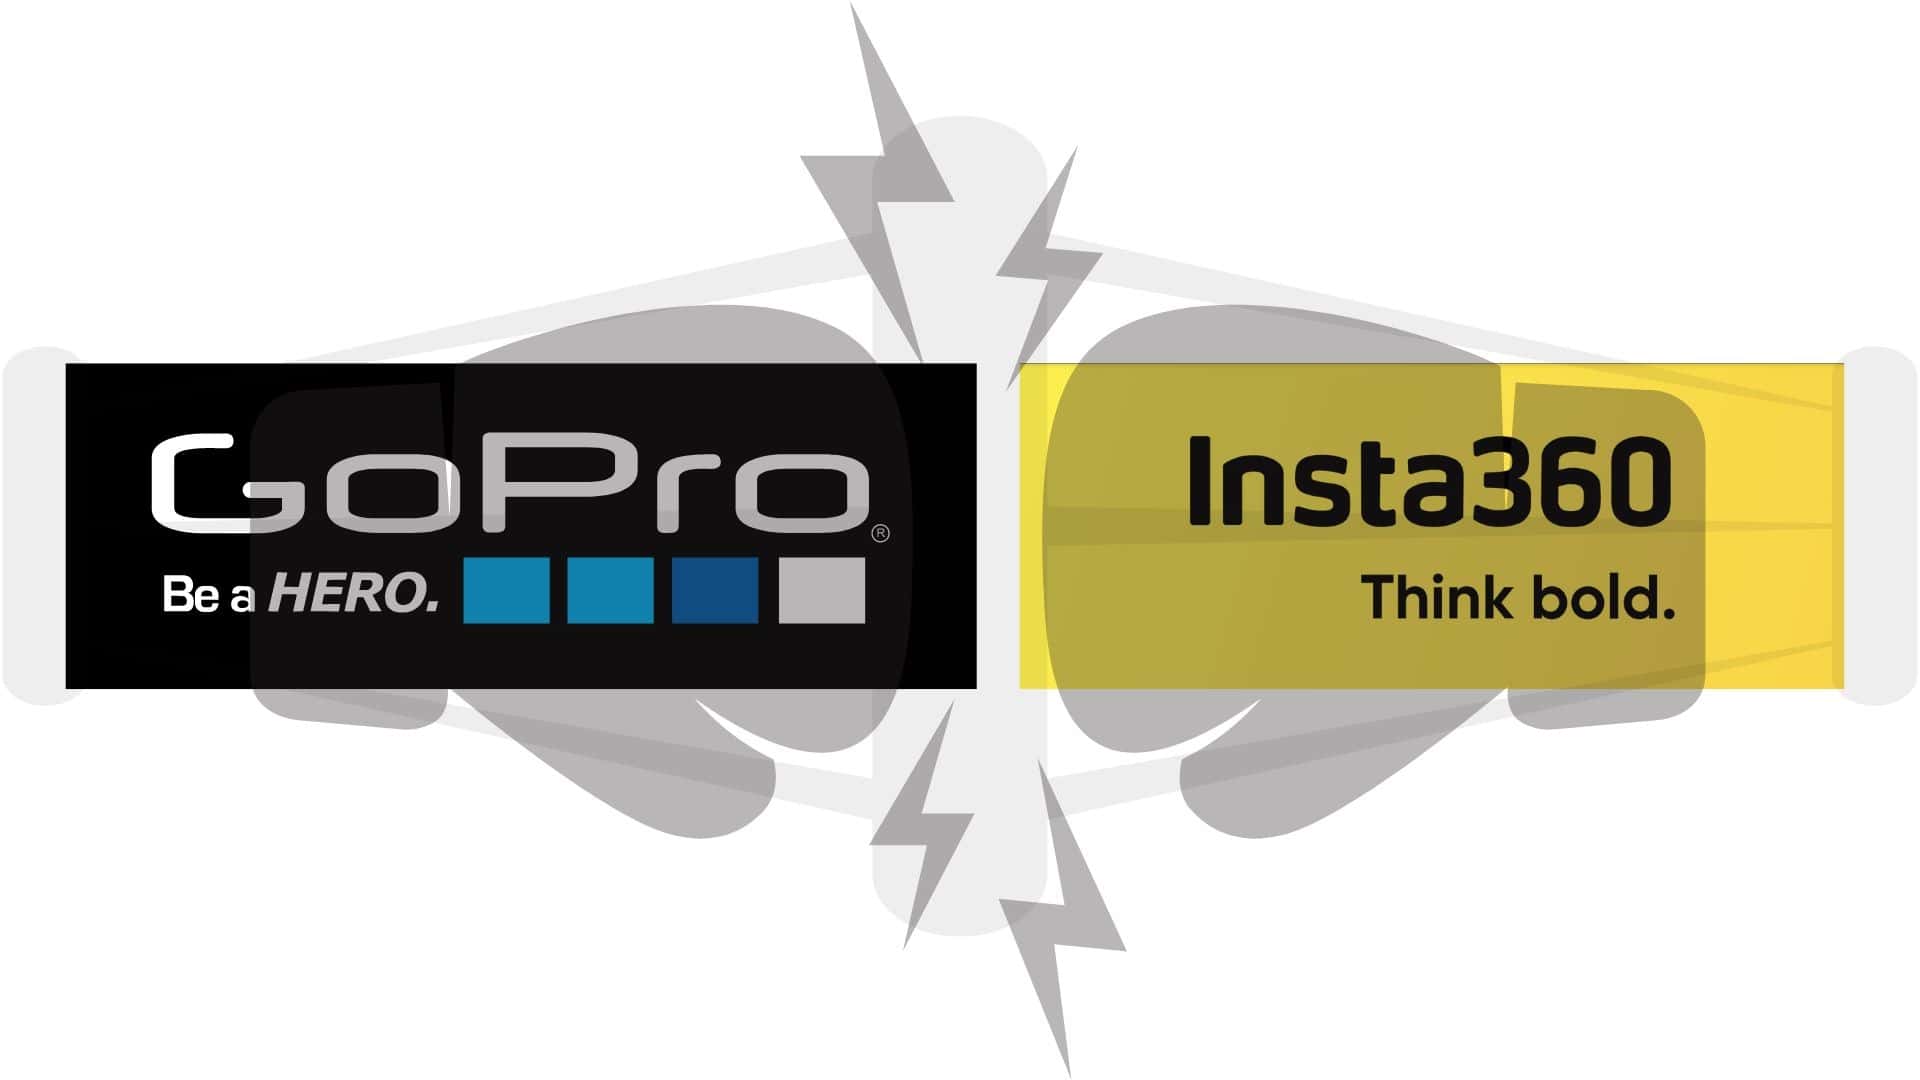 gopro files complaint alleging insta360 infringed on several patents